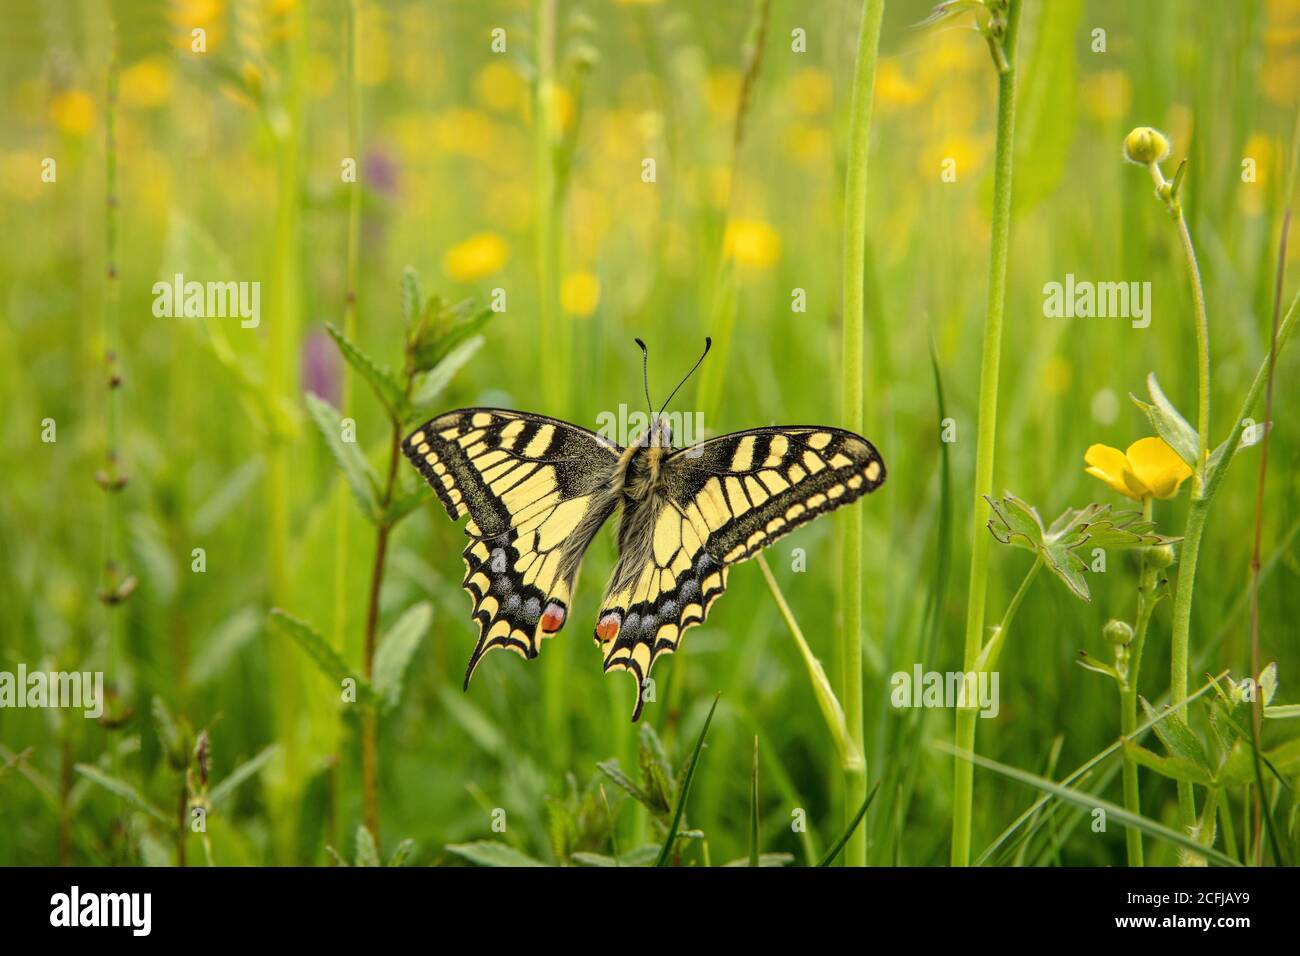 The Netherlands, Schimmert. Spring. Flowers. Old World swallowtail (Apilio machaon) on buttercup plant. Stock Photo